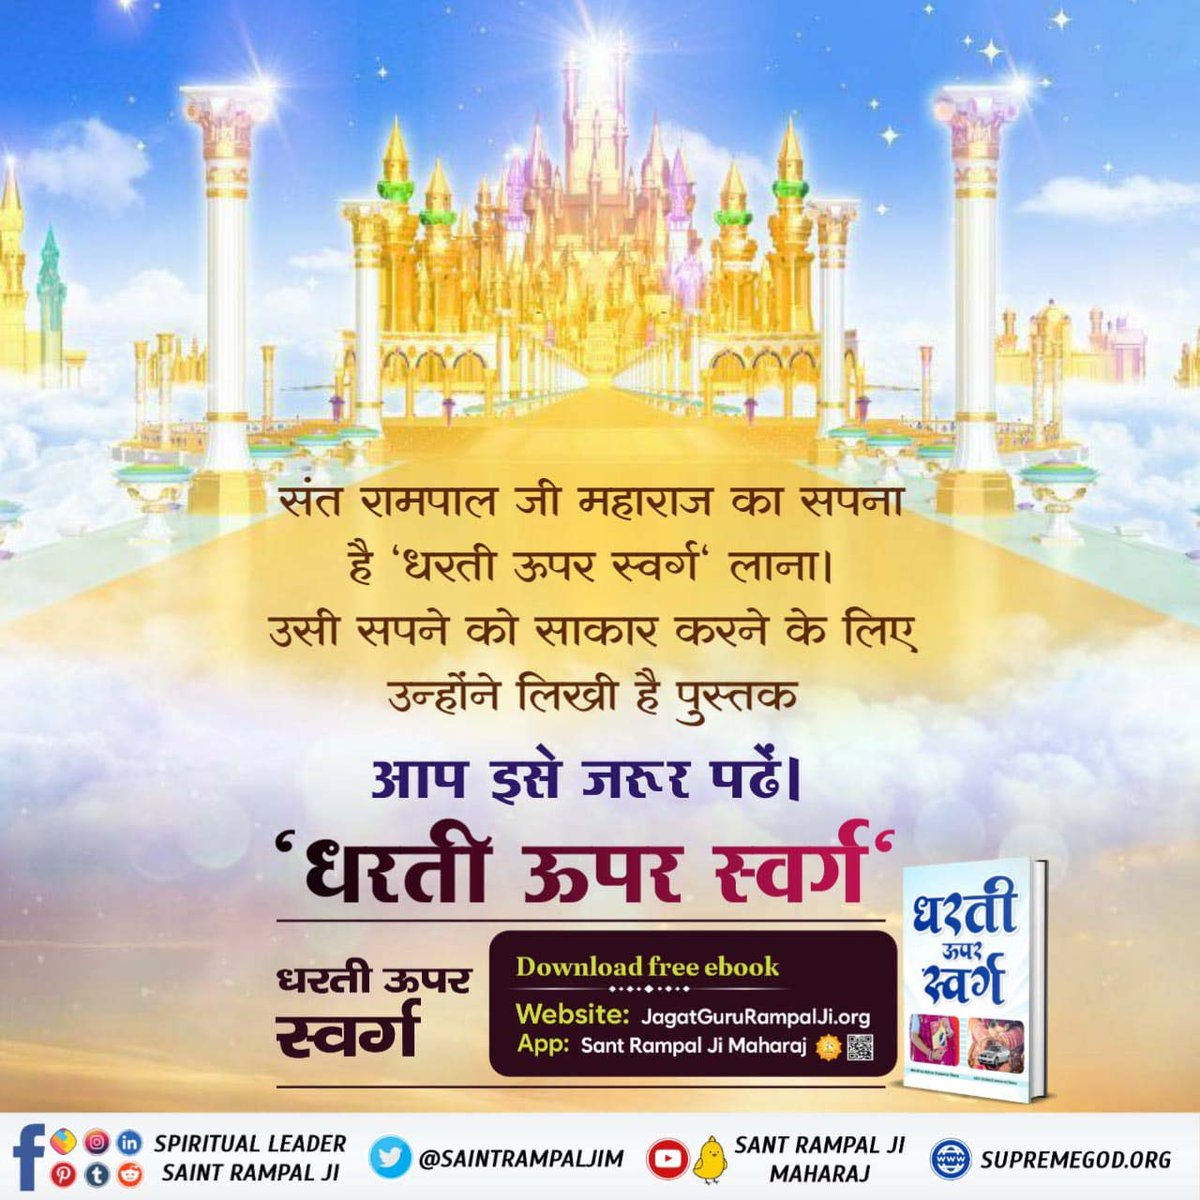 #धरती_को_स्वर्ग_बनाना_है
IN HIS BOOK DHARTI UPAR SWARG,Sant Rampal Ji Maharaj
has explained that by consuming the medicine of true spiritual knowledge provided by a complete saint, society can easily put an end to prevalent vices and addictions, thus transforming the Earth...